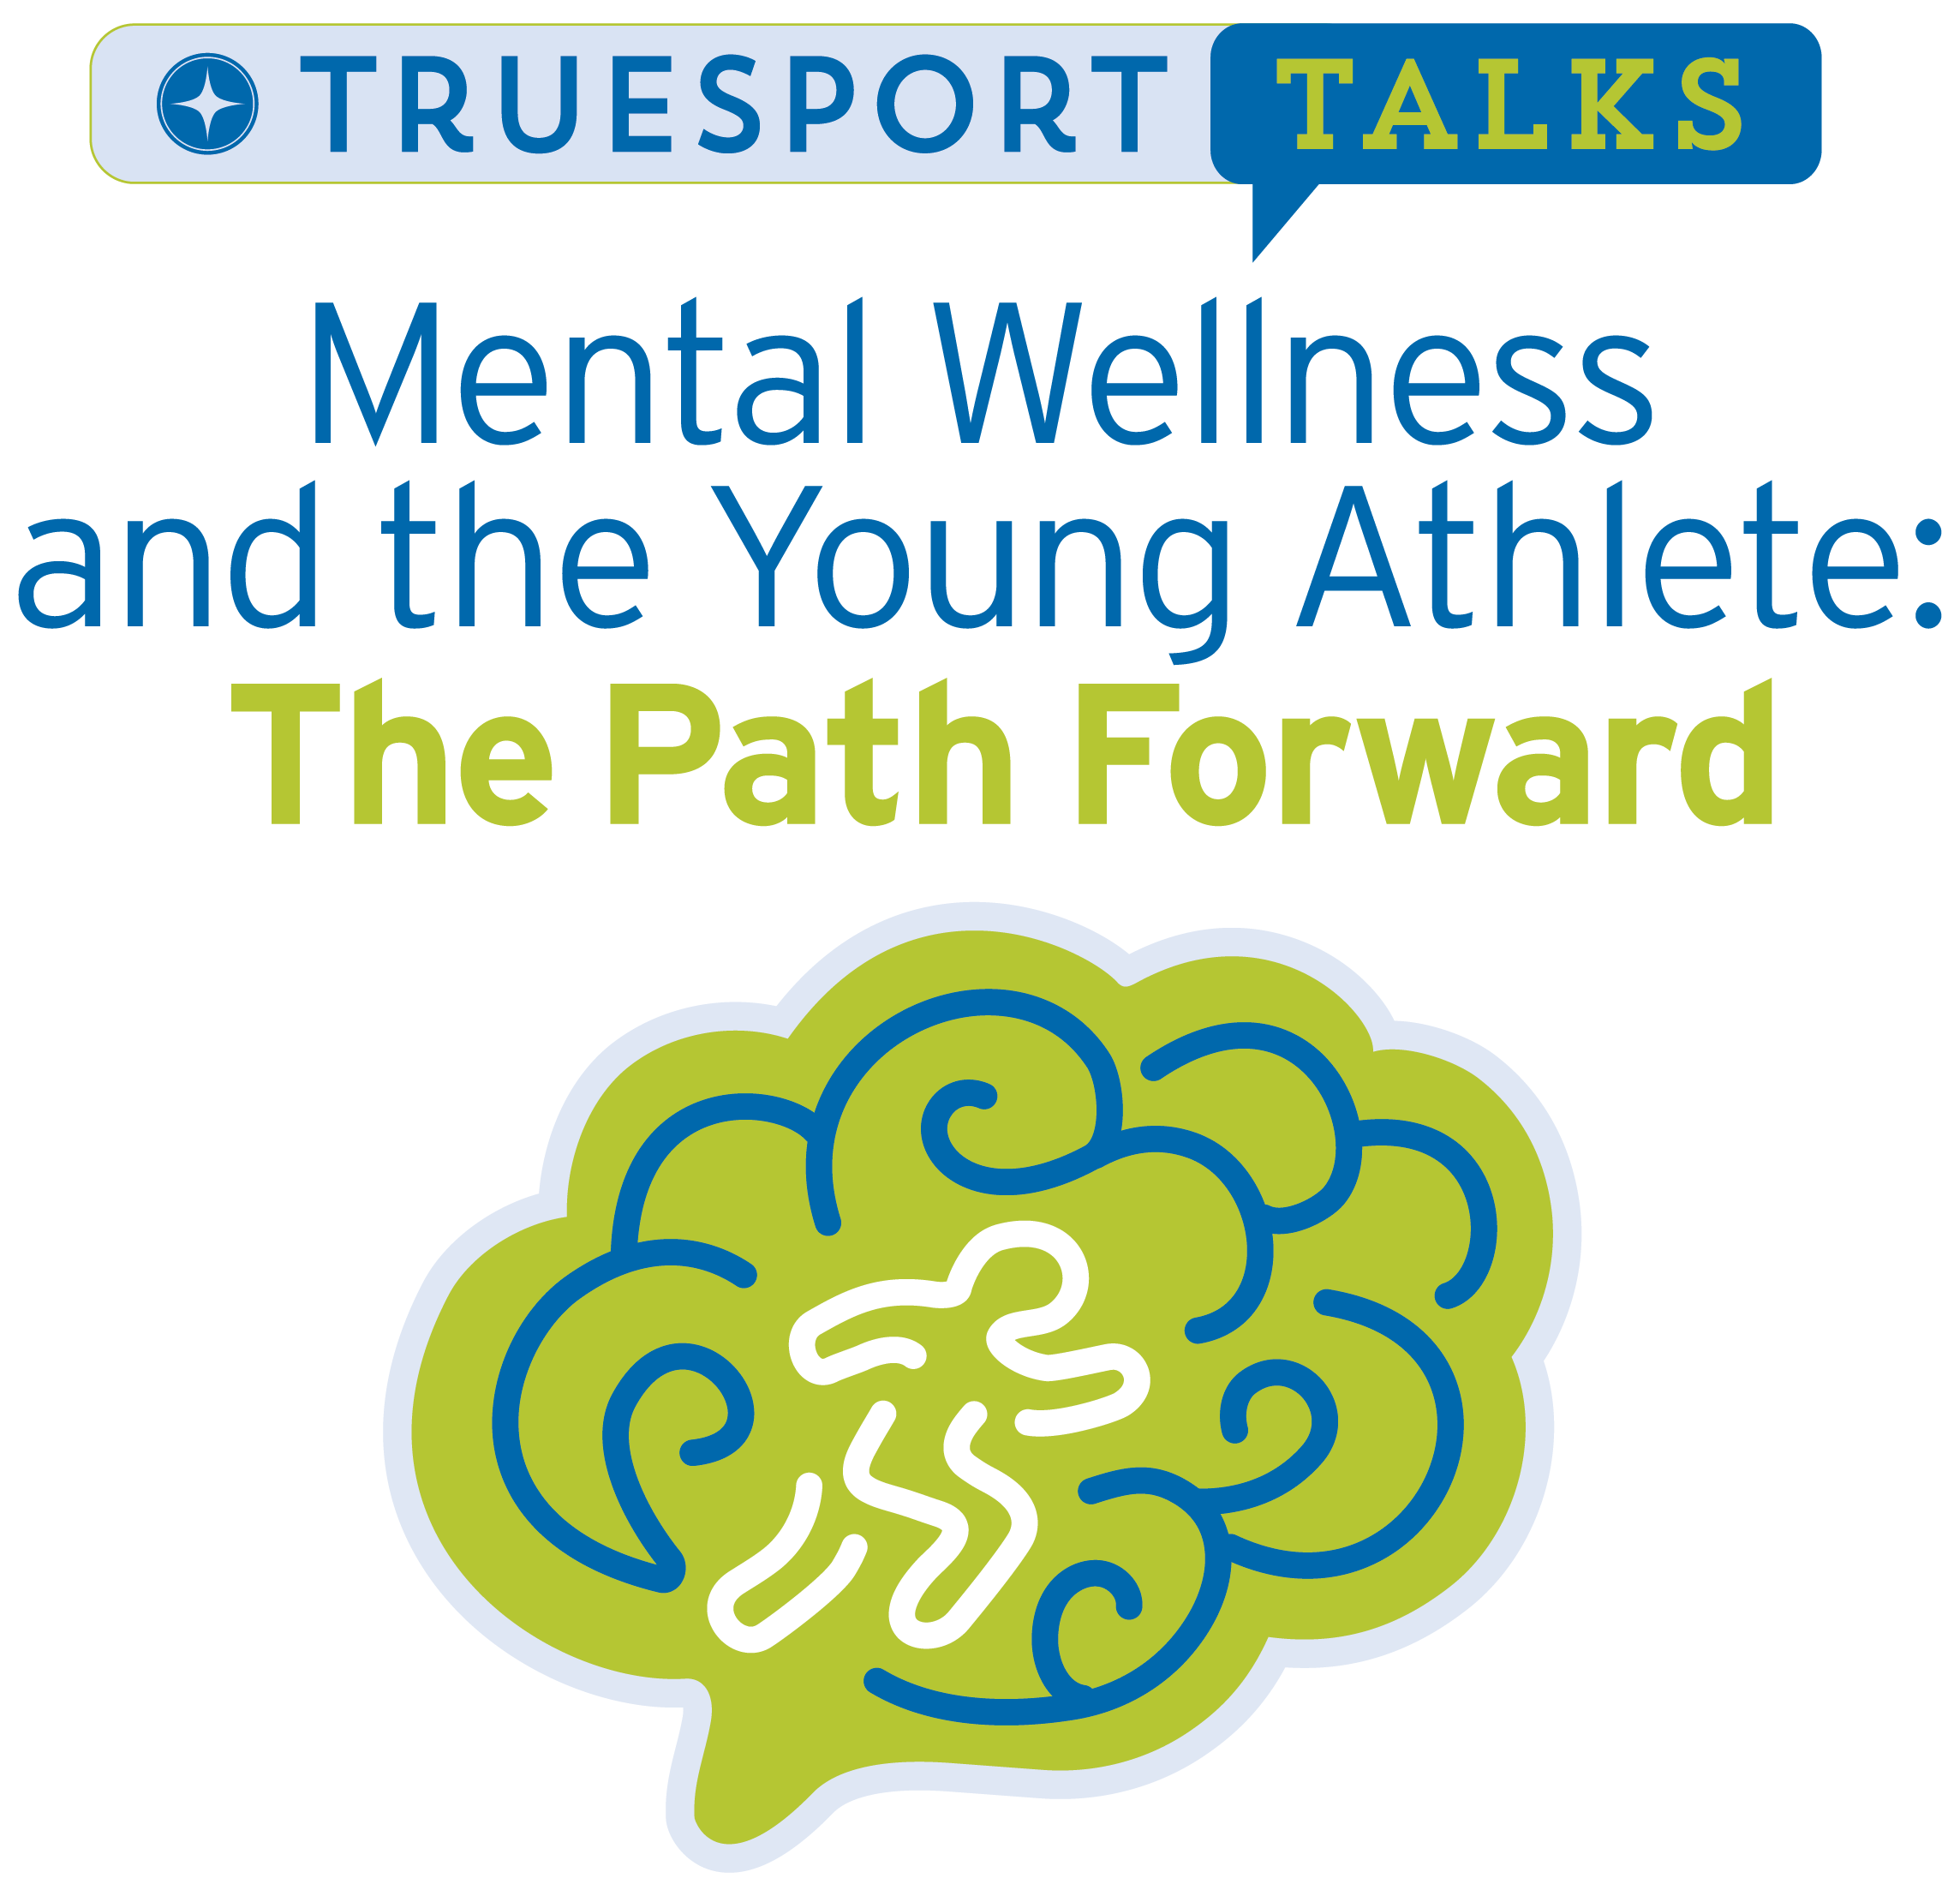 TrueSport Talks - Mental Wellness and the Young Athlete: The Path Forward